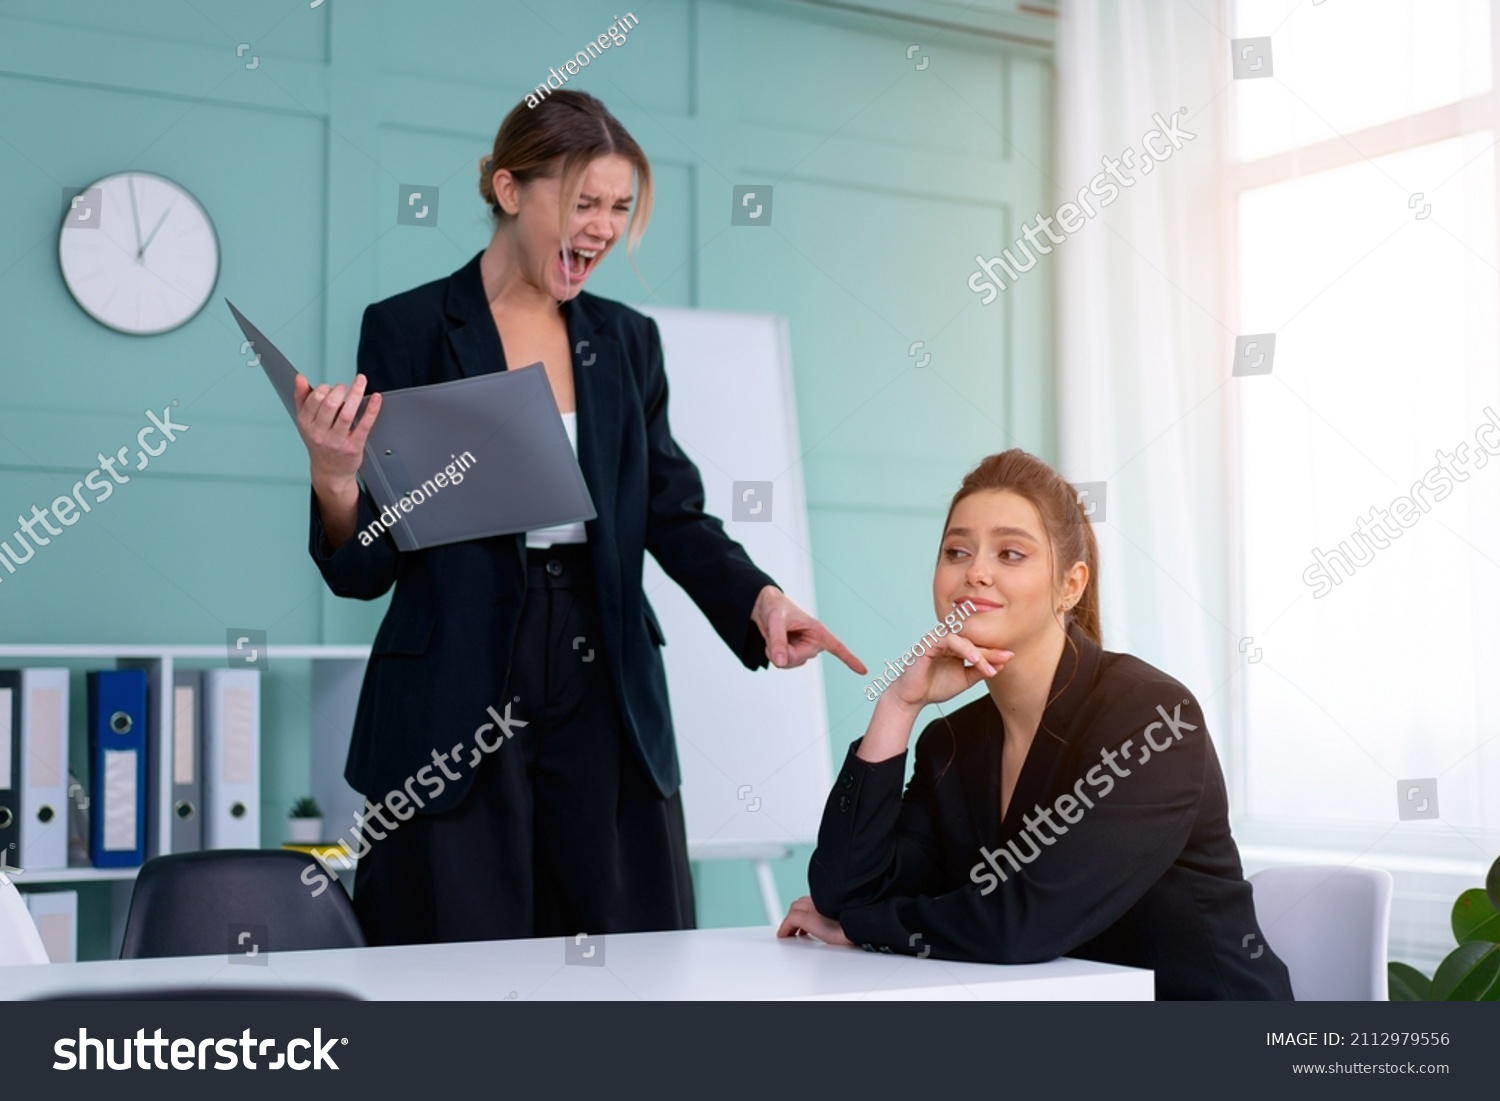 Boss screaming at frustrated employee, bullying and emotional abuse at work. Toxic work environment. Angry female irate boss yelling and shouting at his secretary employee. CEO rebuke for deadline #2112979556